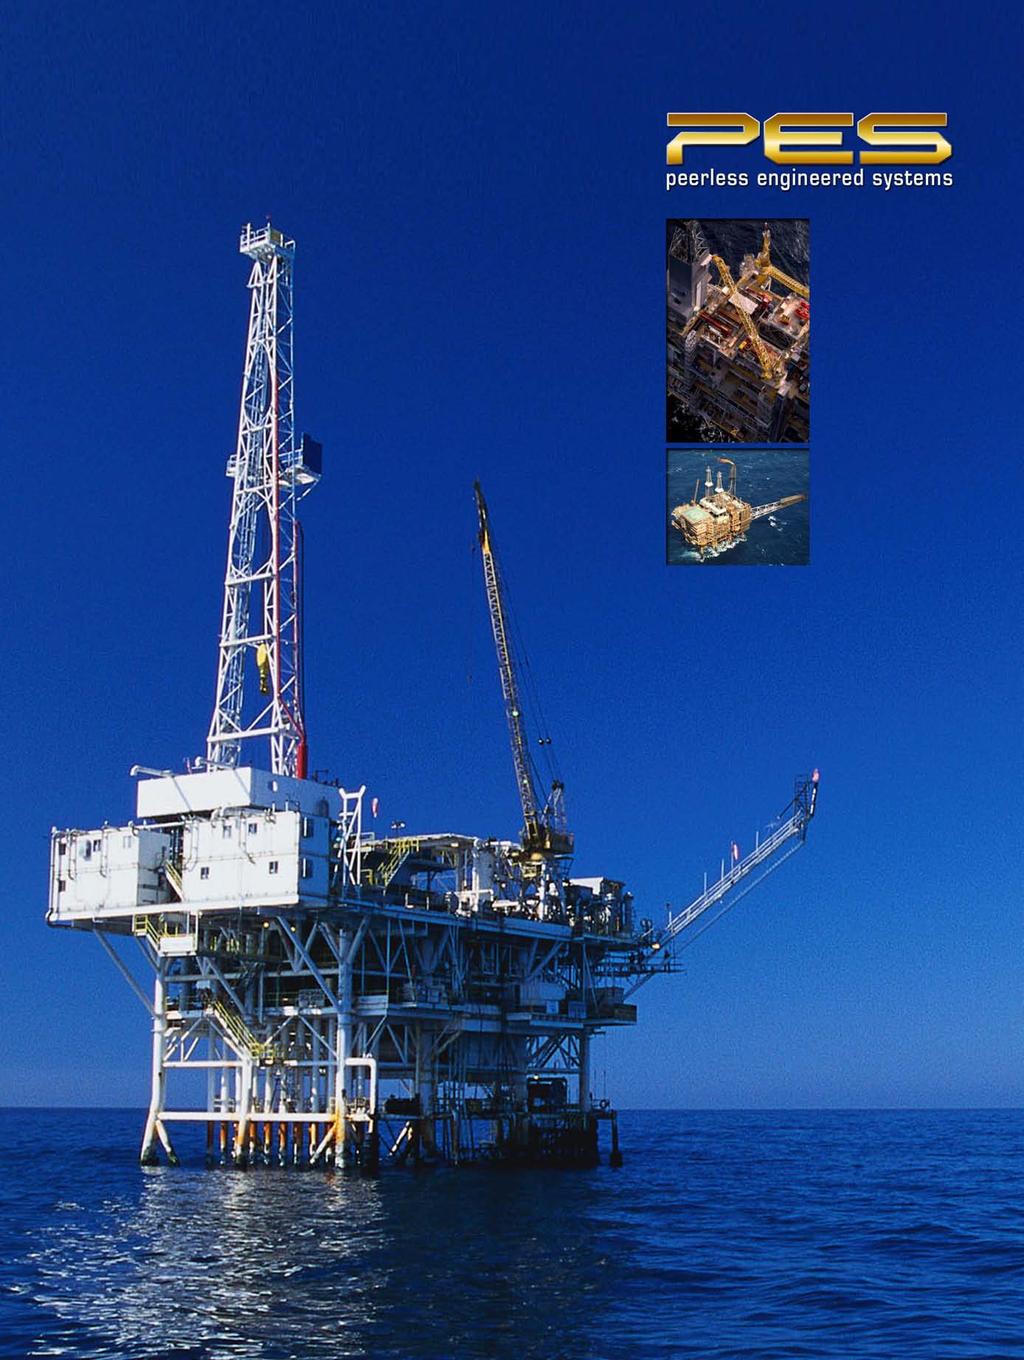 innovative PEERLESS PUMP FIRE PROTECTION FOR OFFSHORE OIL PLATFORM APPLICATIONS IS DESIGNED TO MEET YOUR SPECIFICATIONS AND VERSATILE PERFORMANCE DEMANDS.